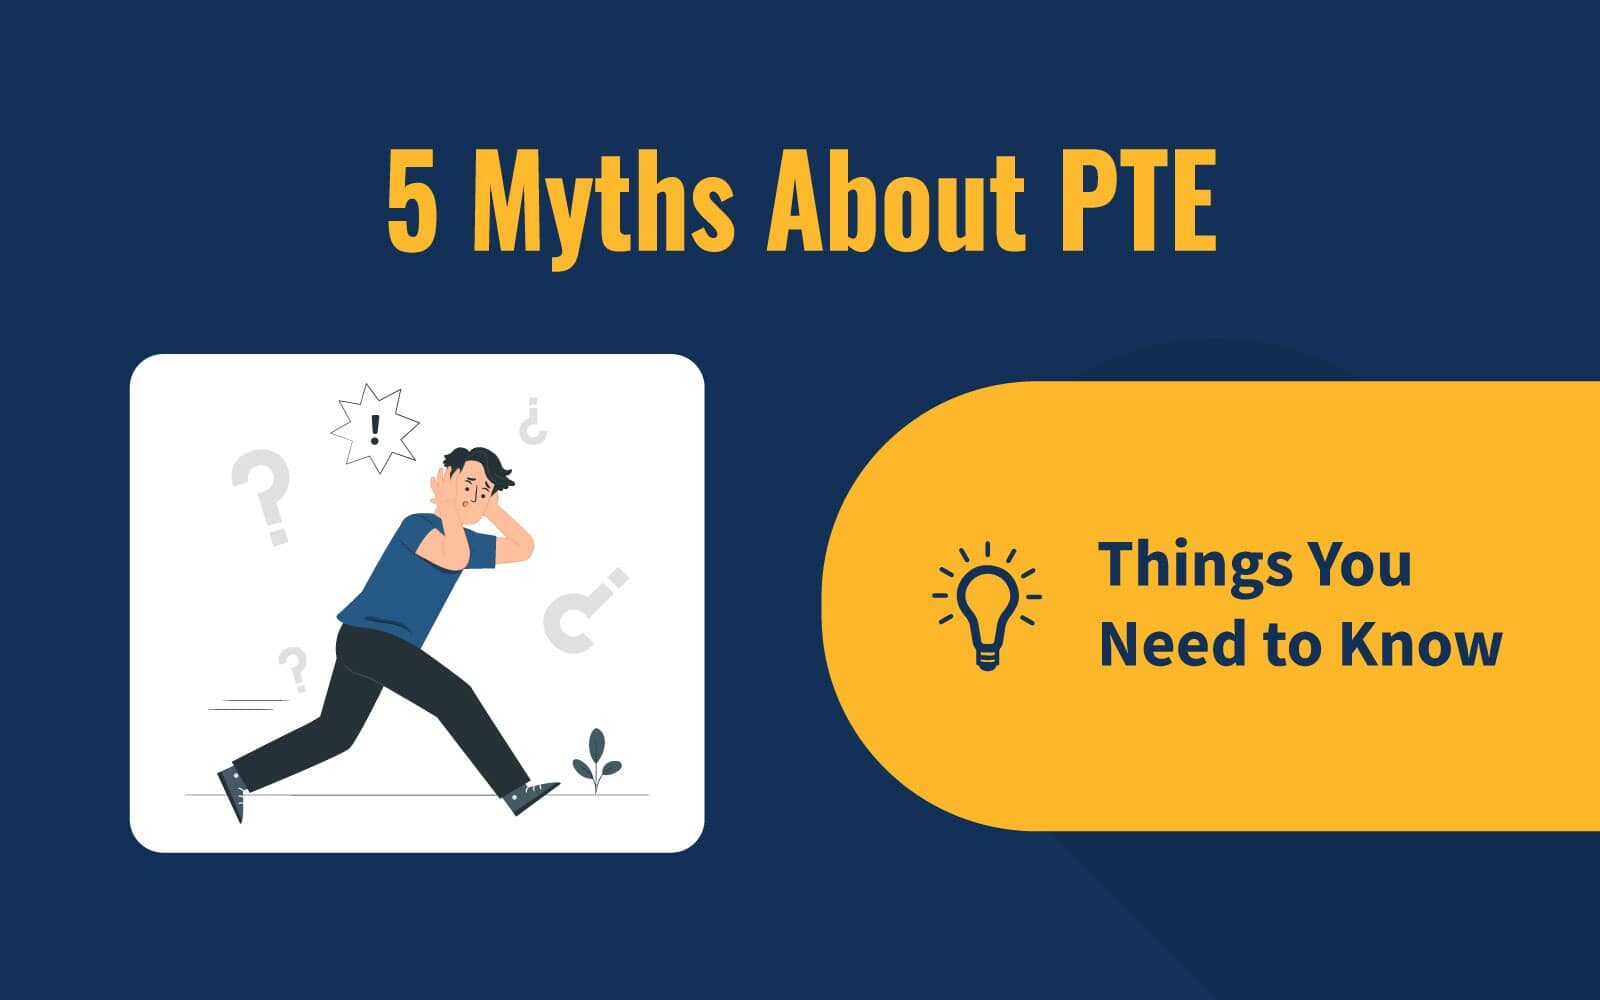 5 Myths About PTE image